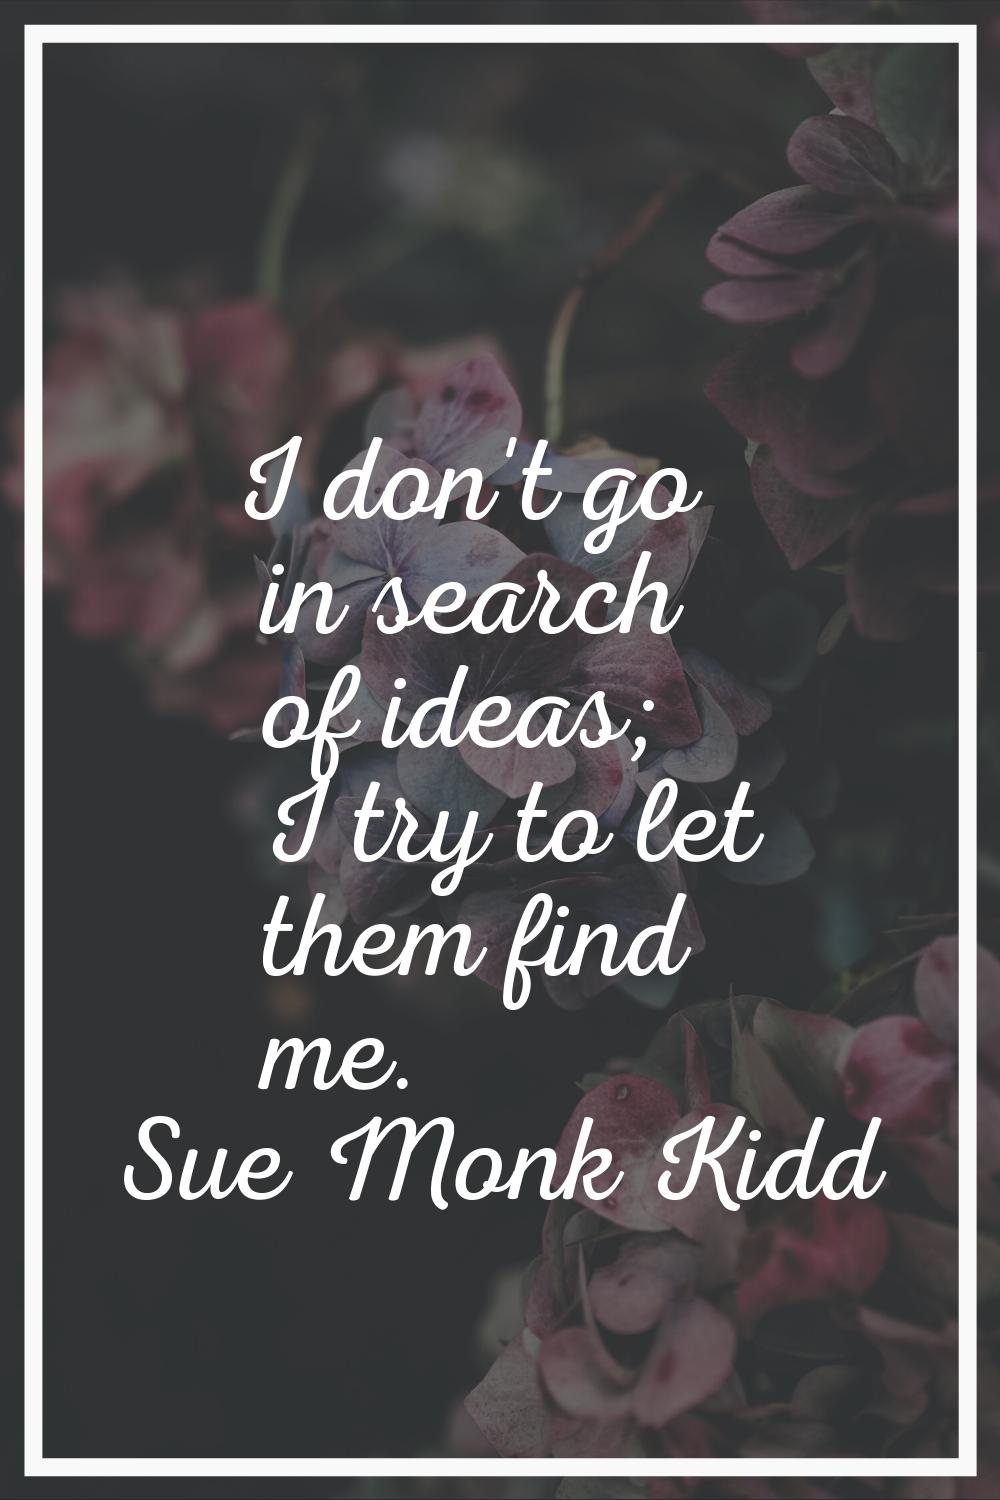 I don't go in search of ideas; I try to let them find me.